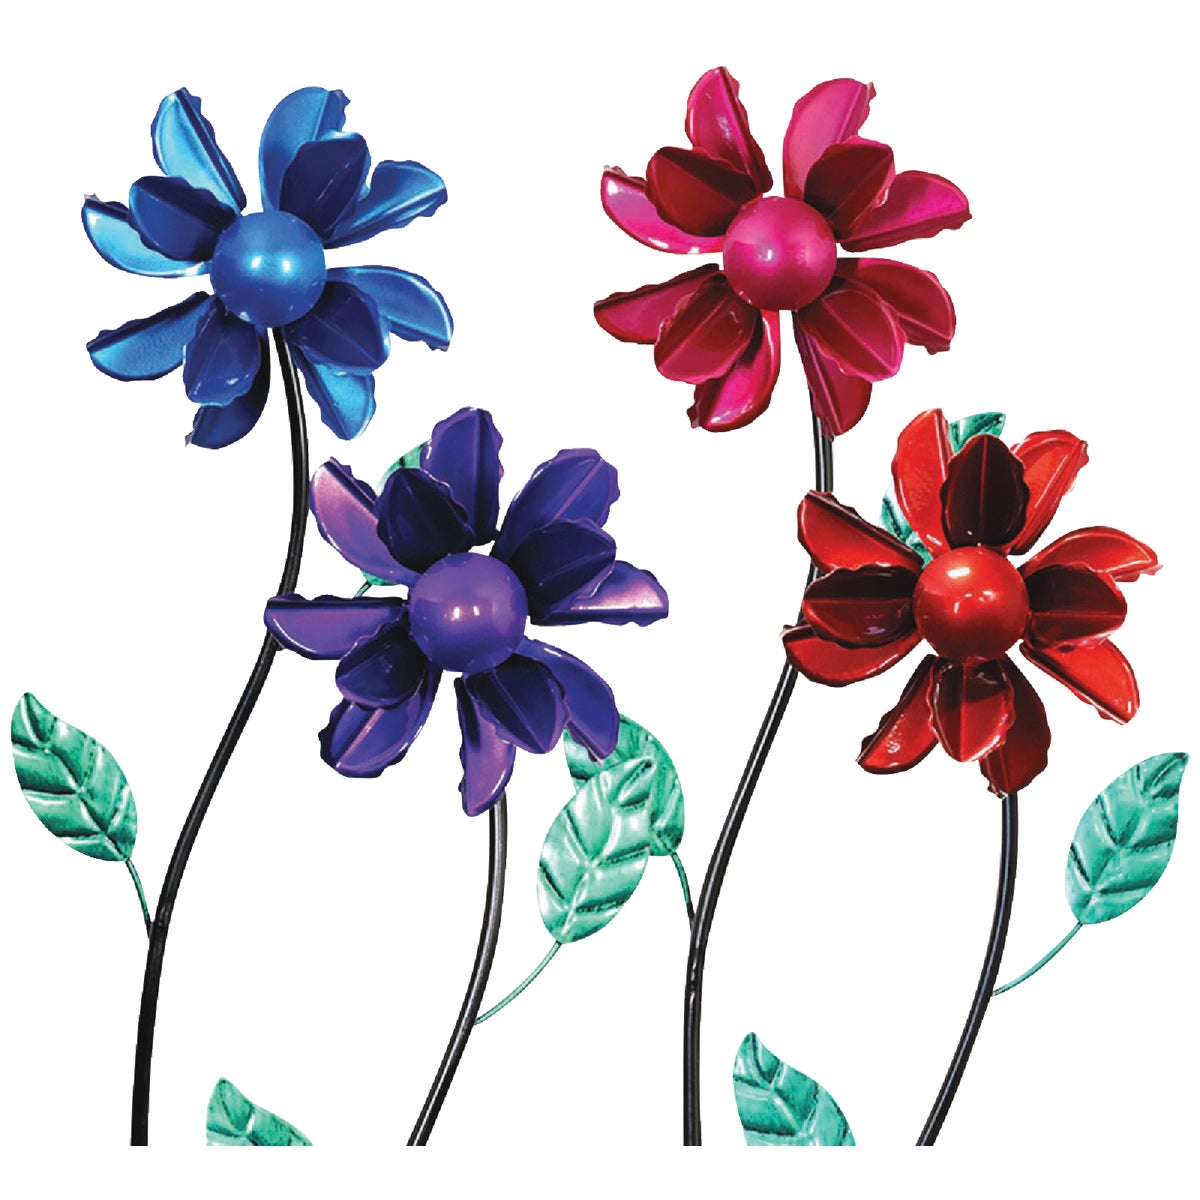 Exhart 50591 Exhart 18 In. Metal Kinetic Mini Flower Plant Stake 50591 Pack of 12